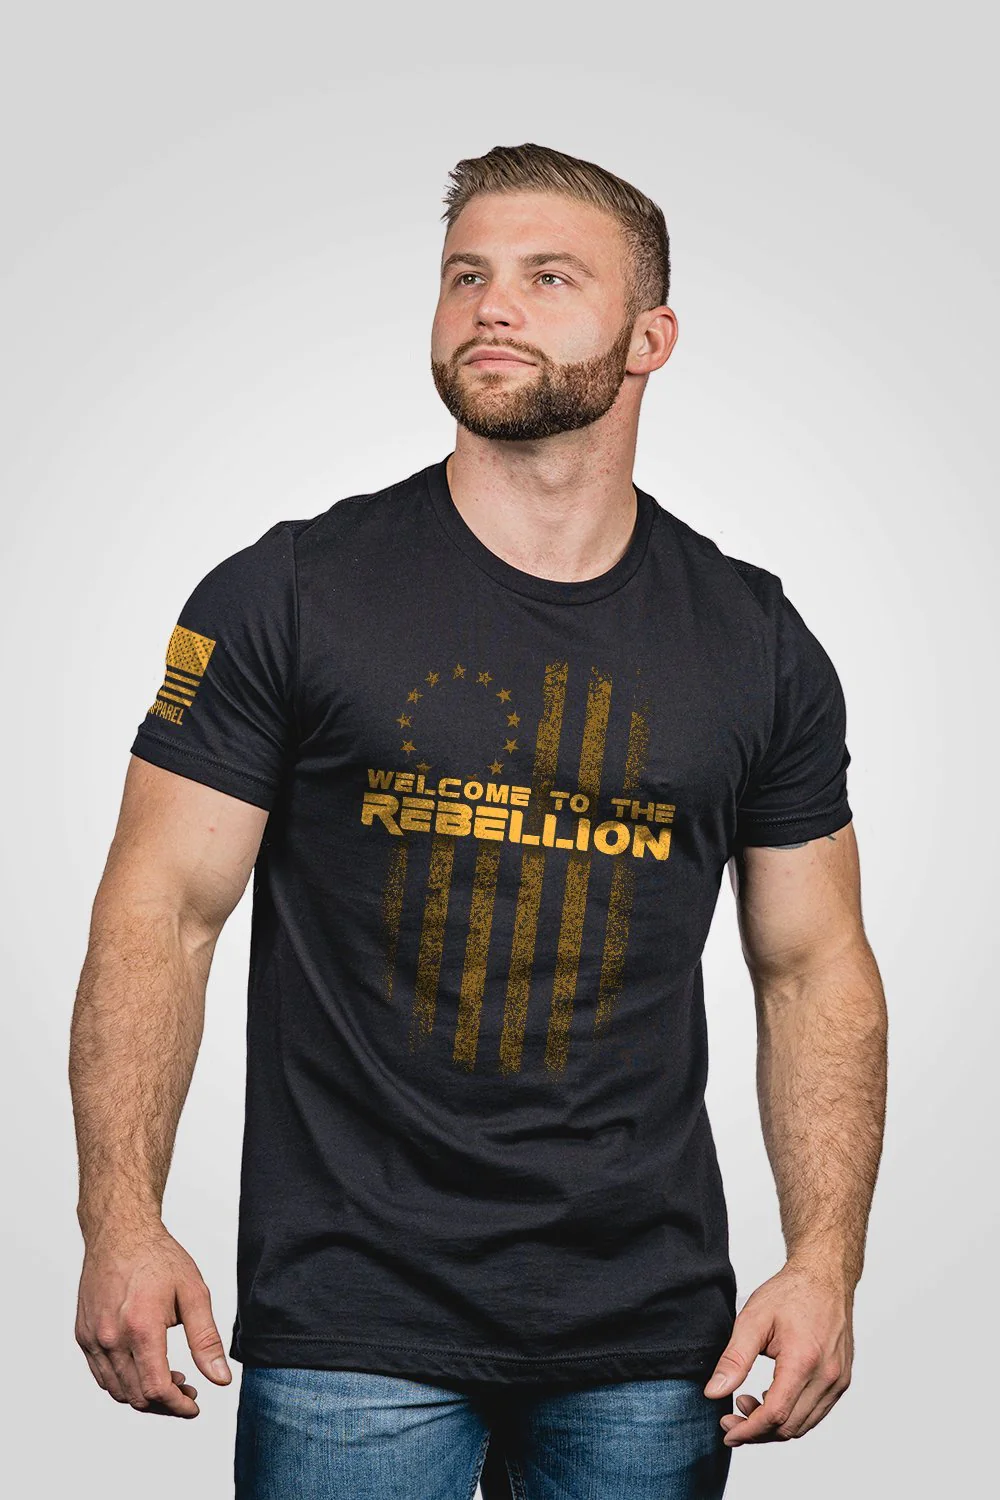 Nine Line Men's Welcome To The Rebellion T-Shirt posted by ProdOrigin USA in Men's Apparel